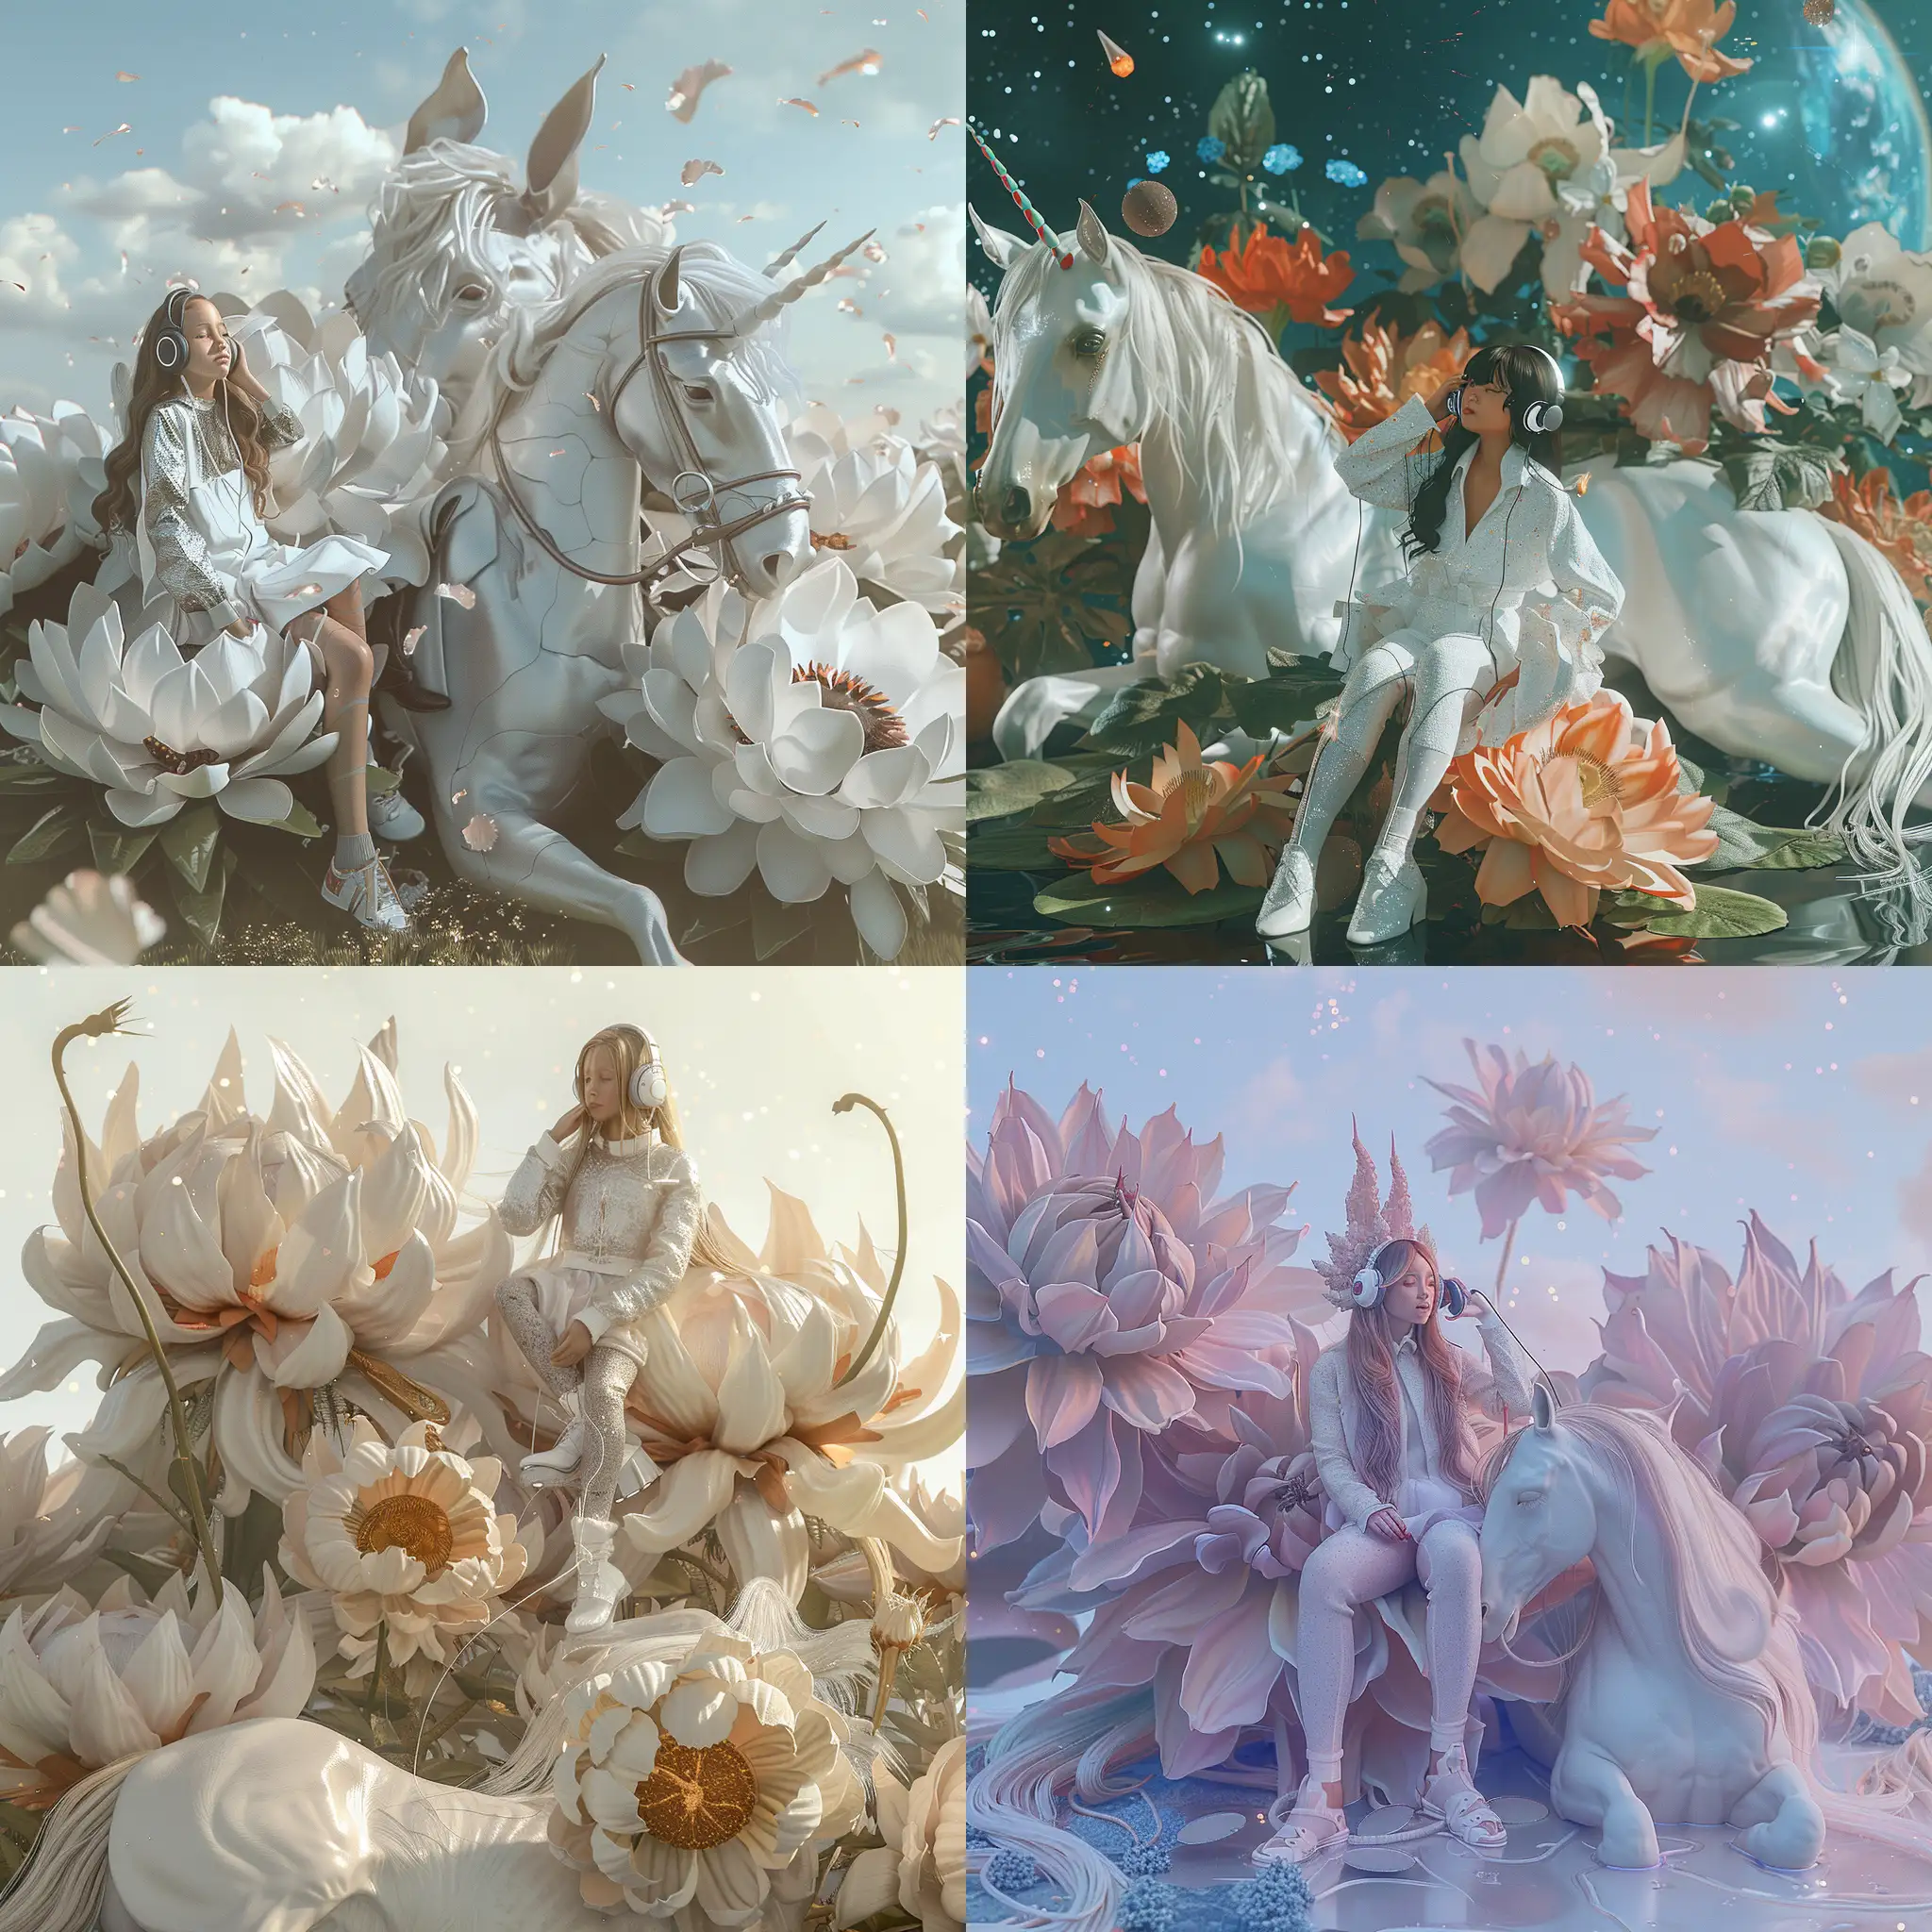 Magical-Girl-Listening-to-Music-on-Giant-Flowers-with-Cosmic-Horse-in-UltraDetailed-8K-Art